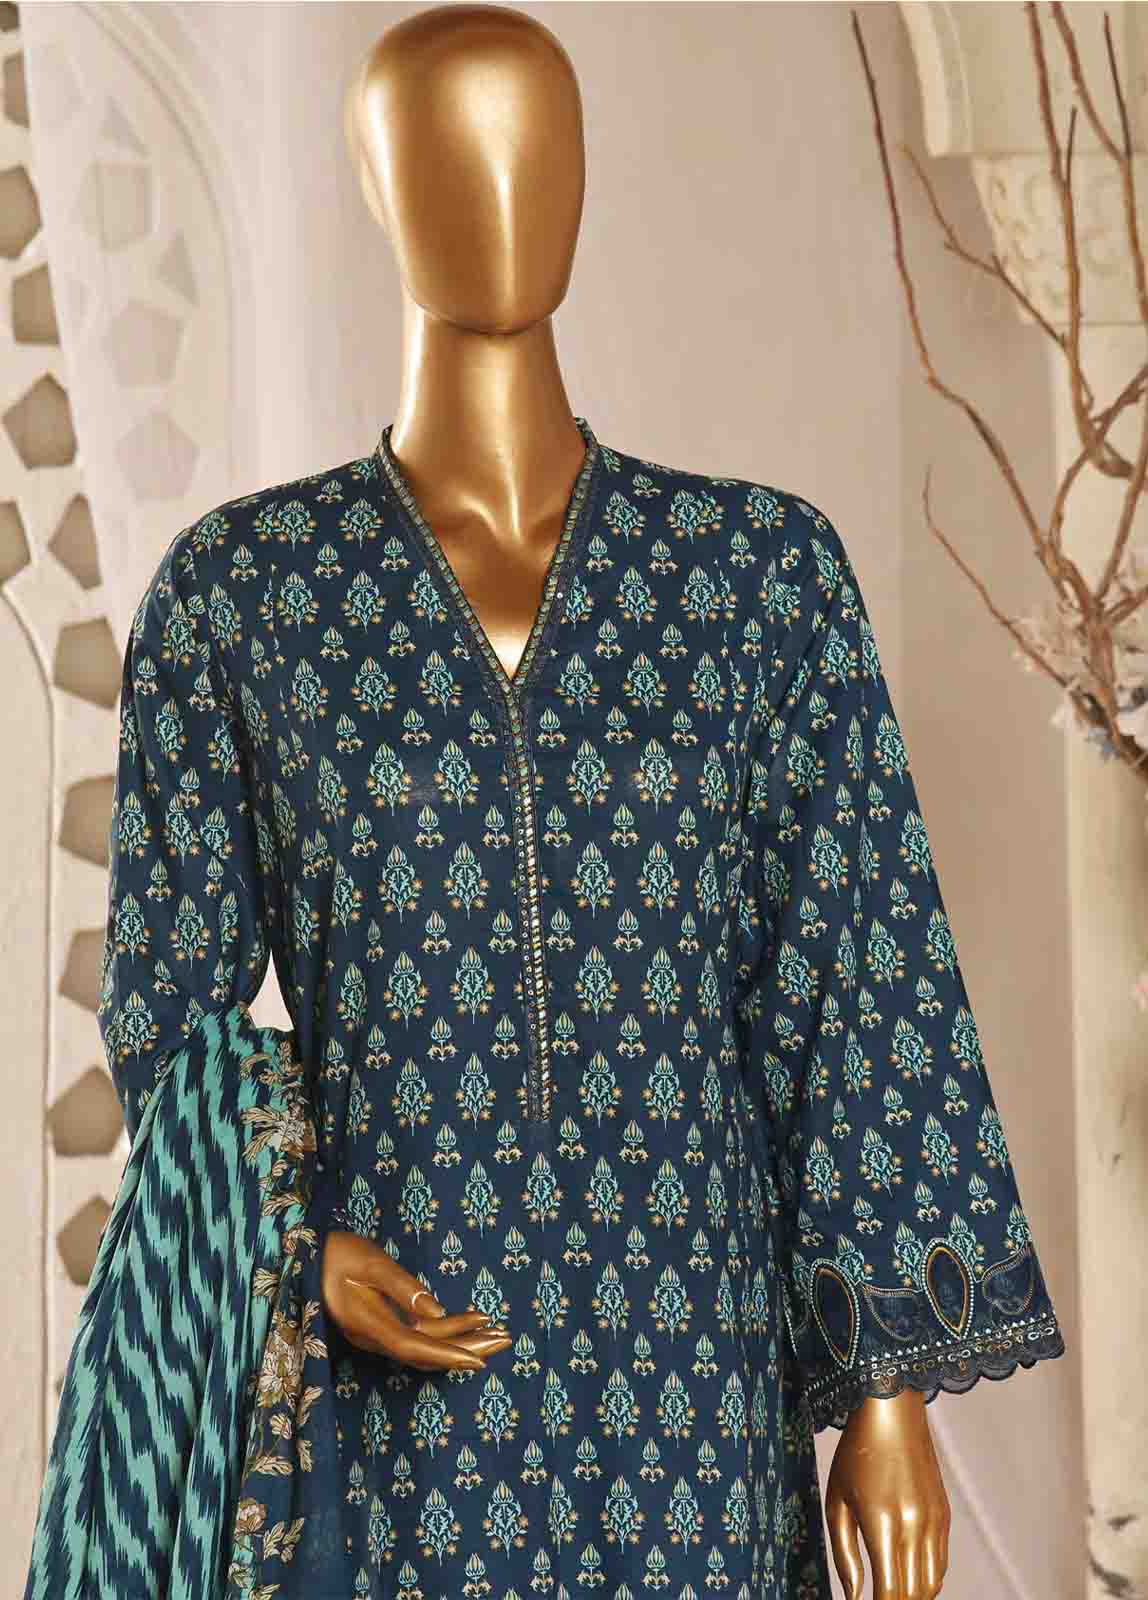 SMLF-FR-630- 3 Piece Embroidered Stitched Suit